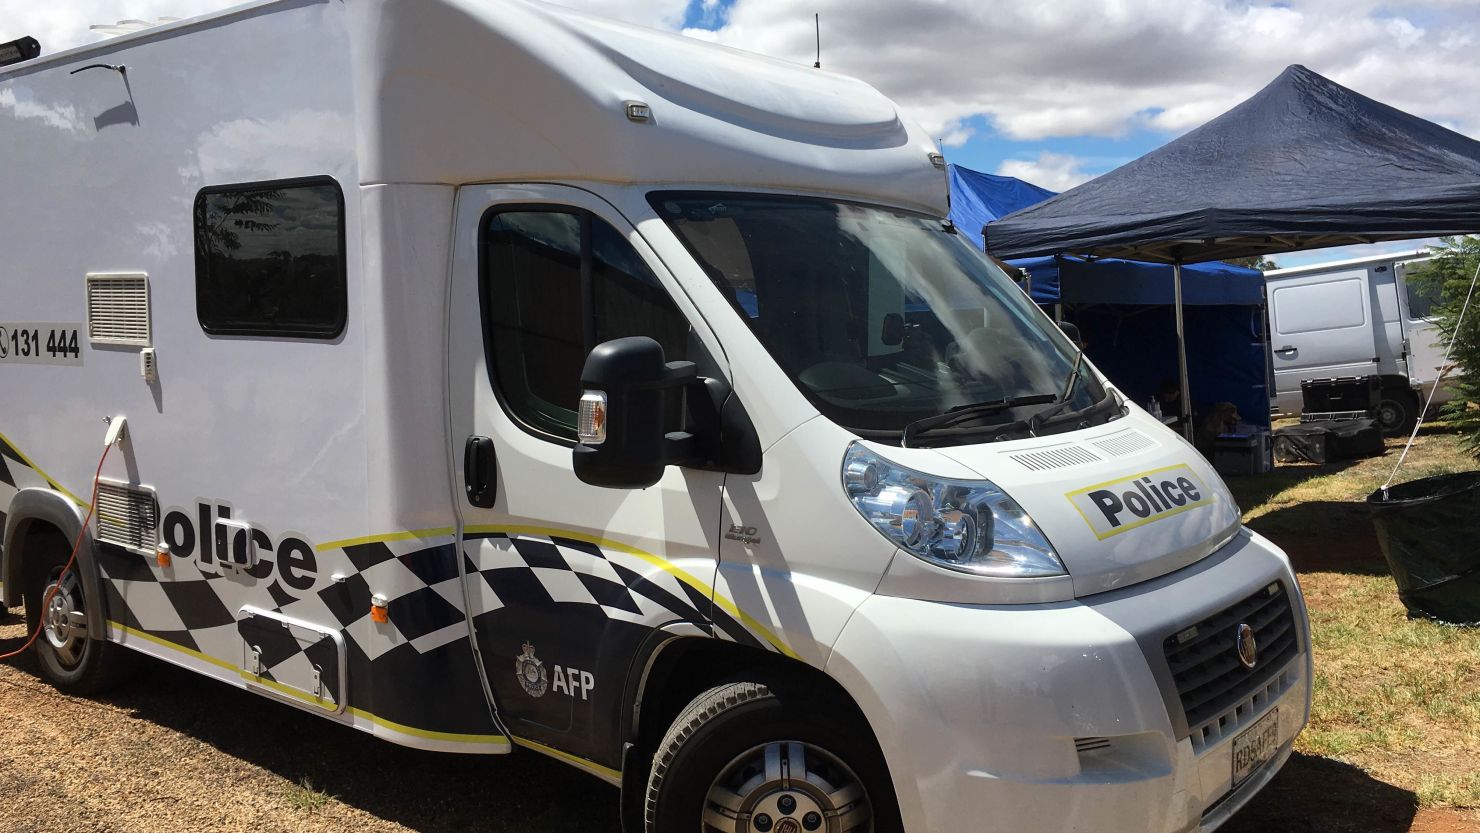 An AFP vehicle in front of the Young house where the 42-year-old Australian, accused of assisting ISIS, was arrested.